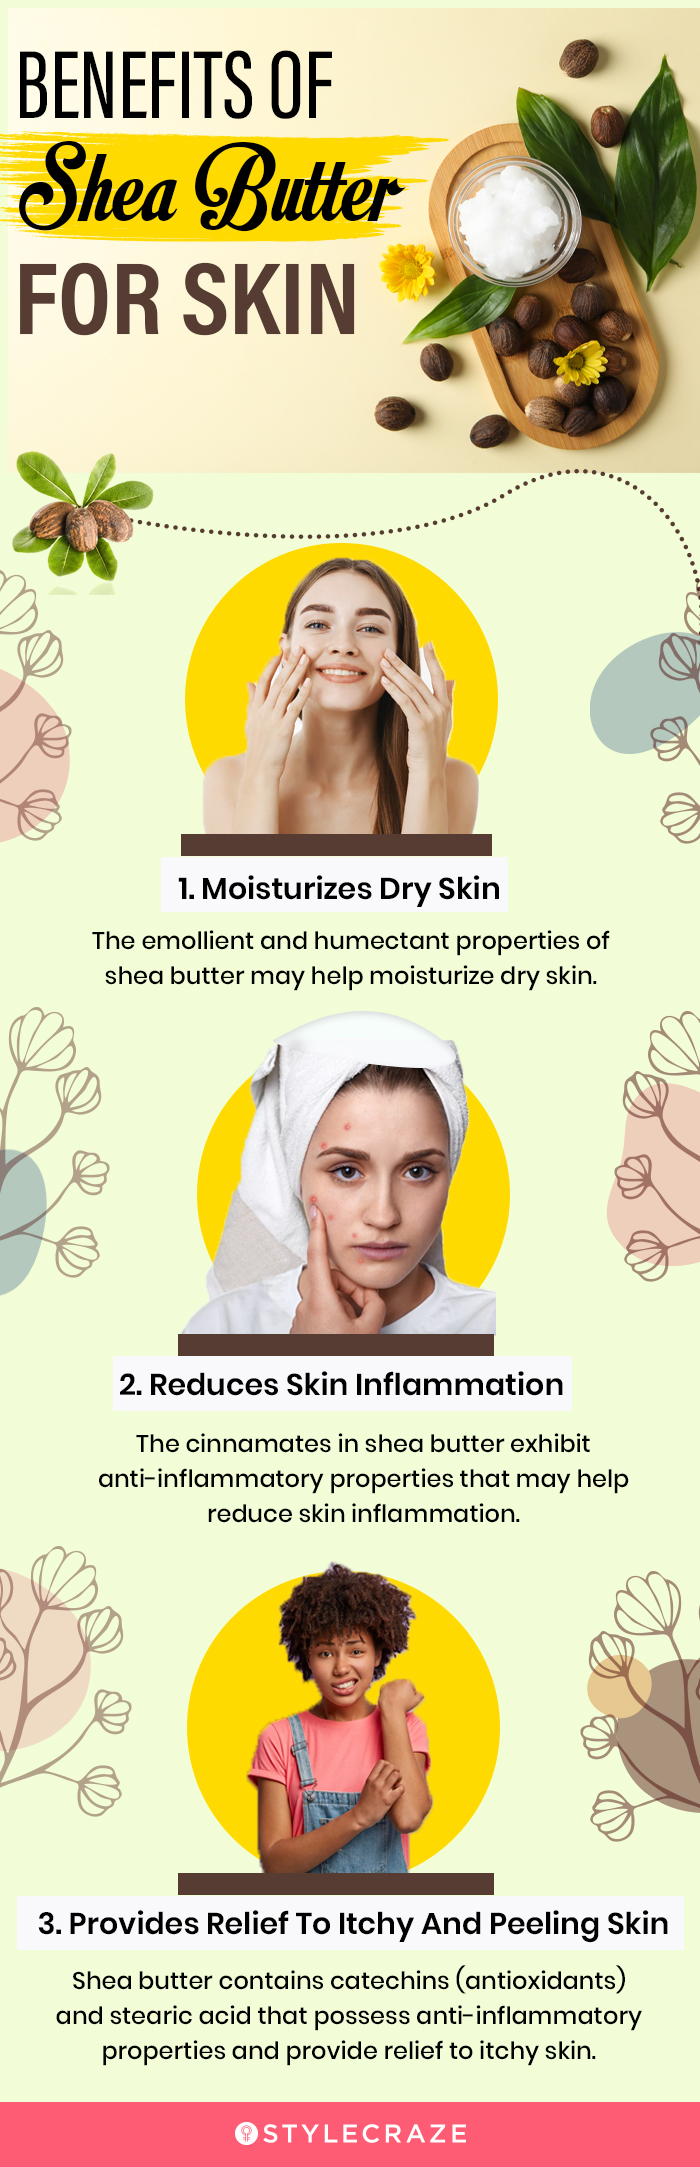 benefits of shea butter for skin [infographic]